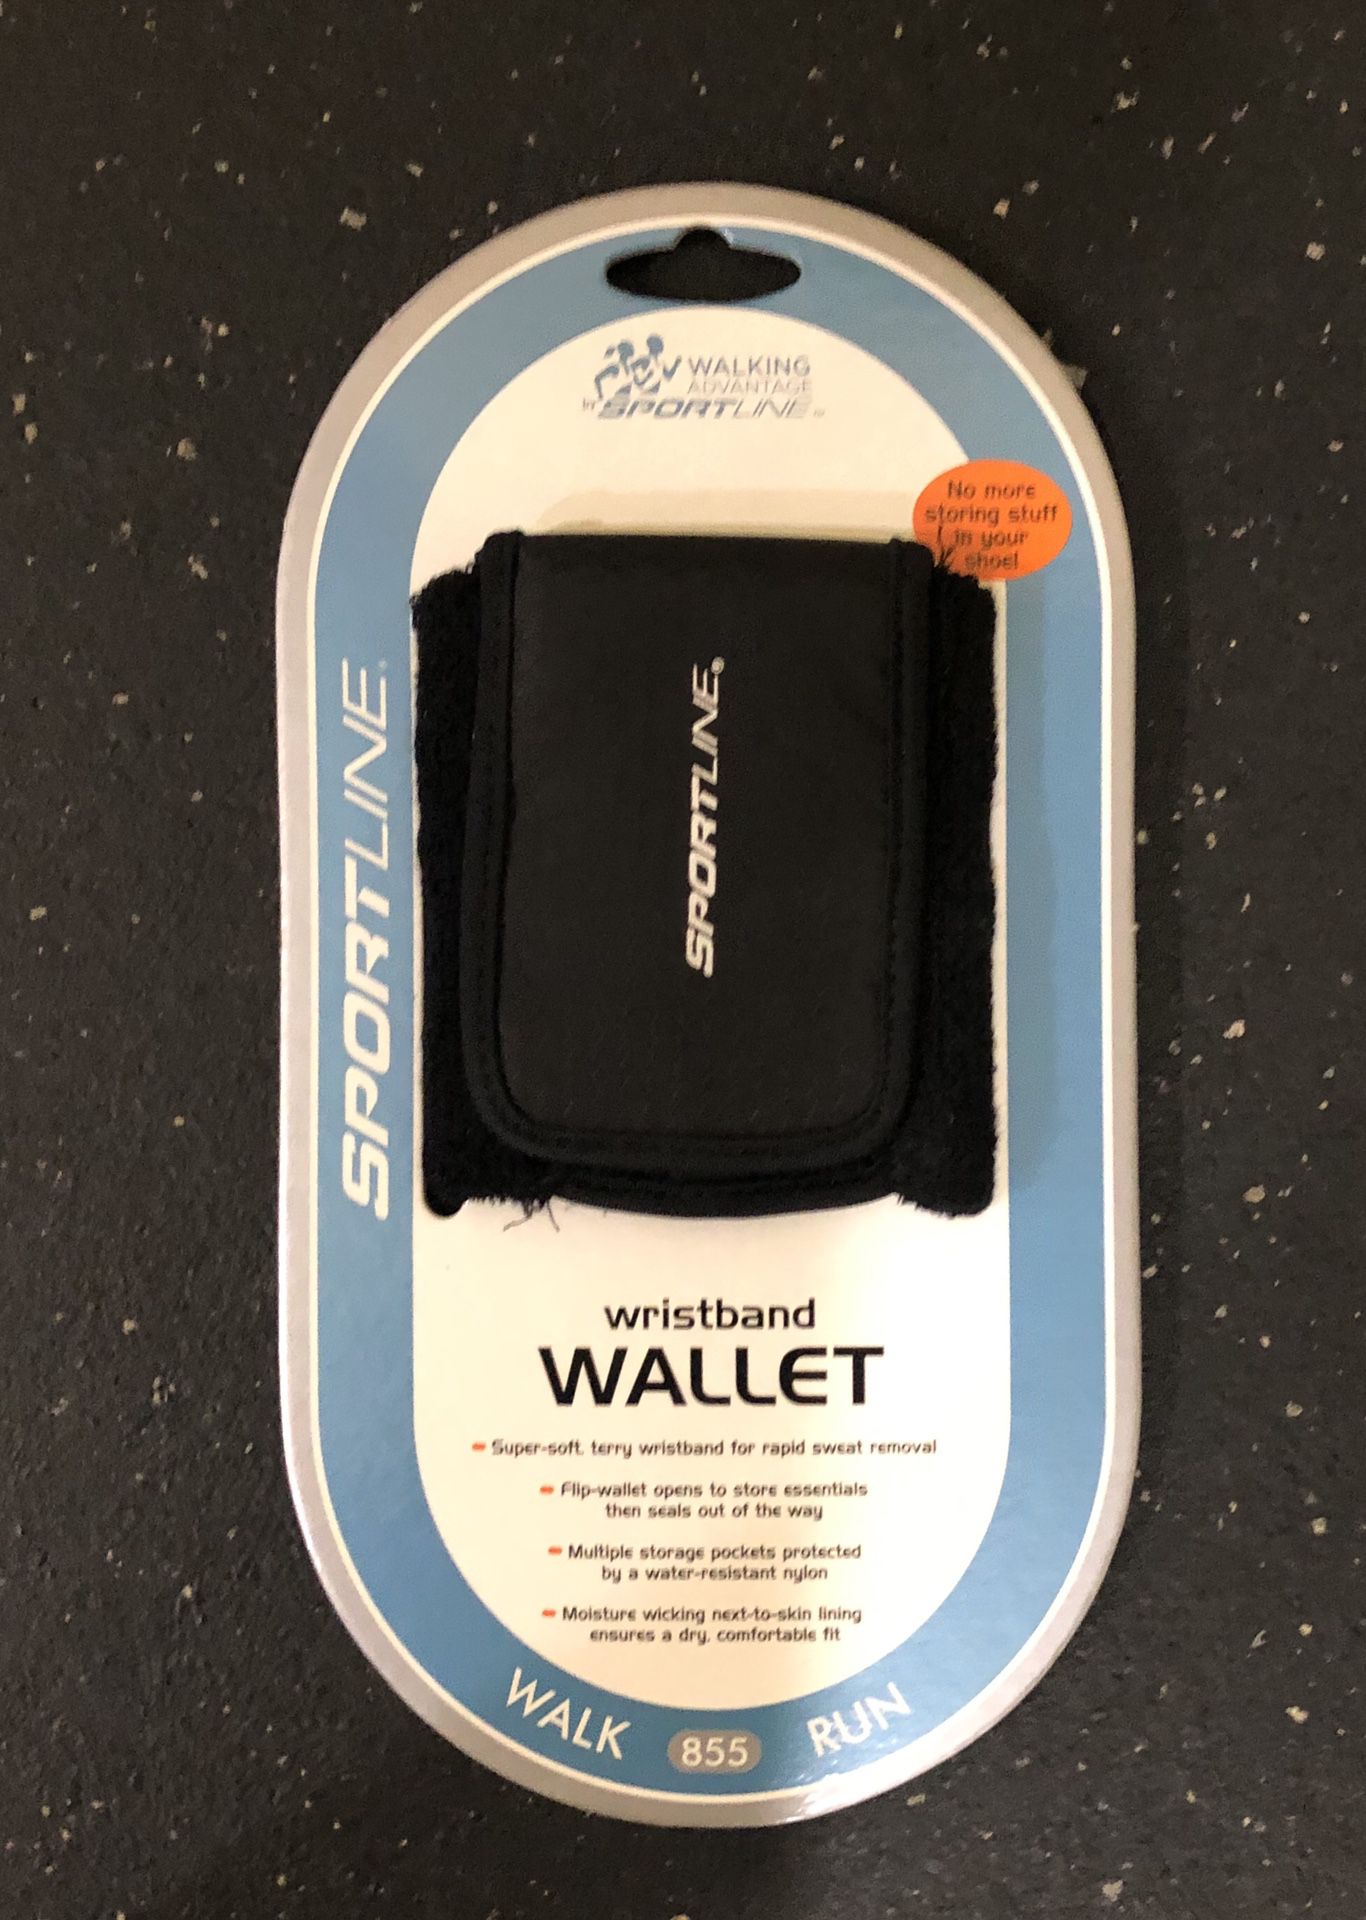 Wristband Wallet for Runners or Walkers - Exercise Equipment